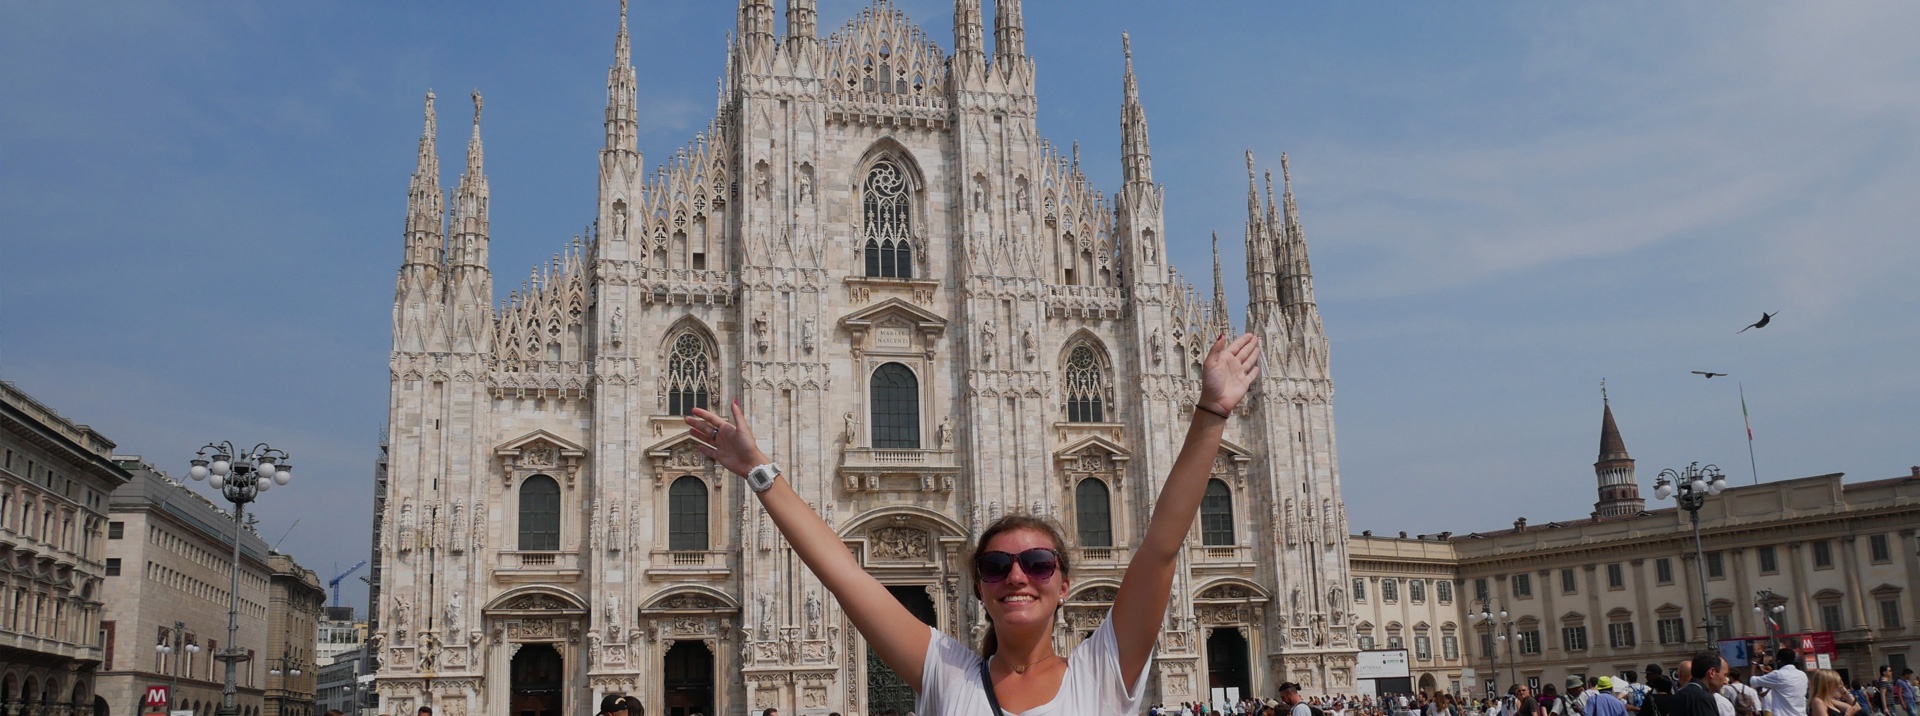 Milan intern standing in front of the Duomo di Milano